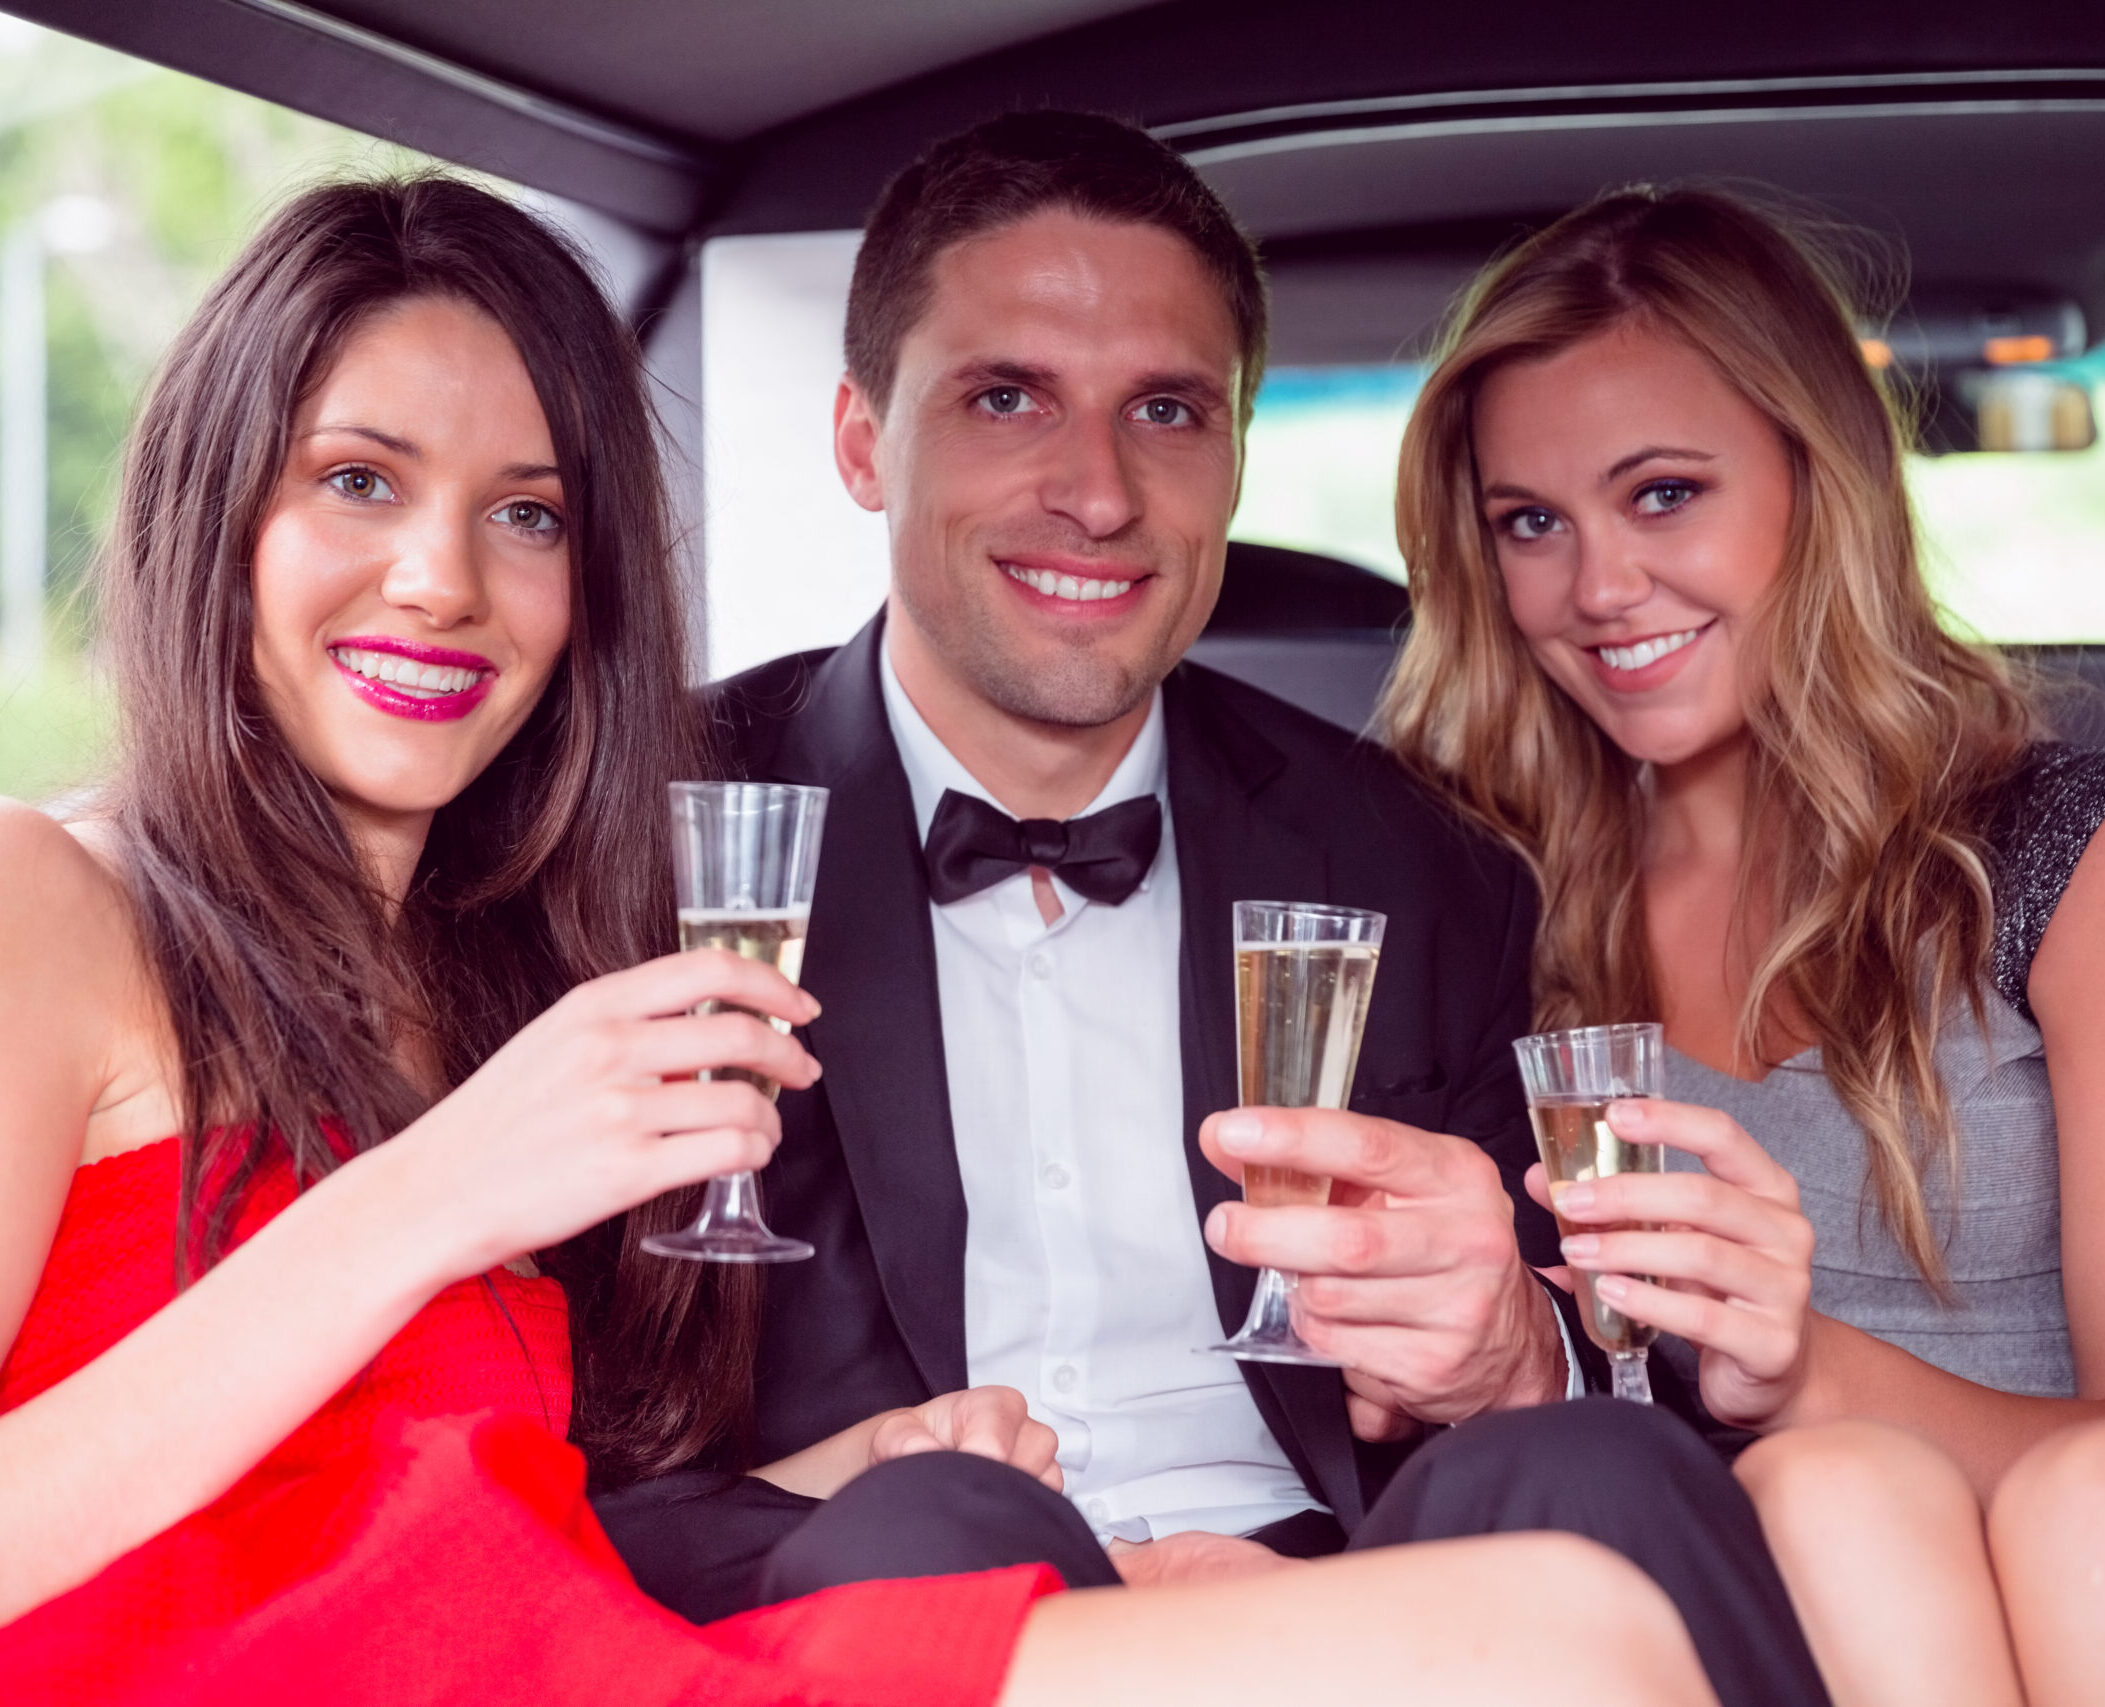 Happy friends drinking champagne in limousine on a night out